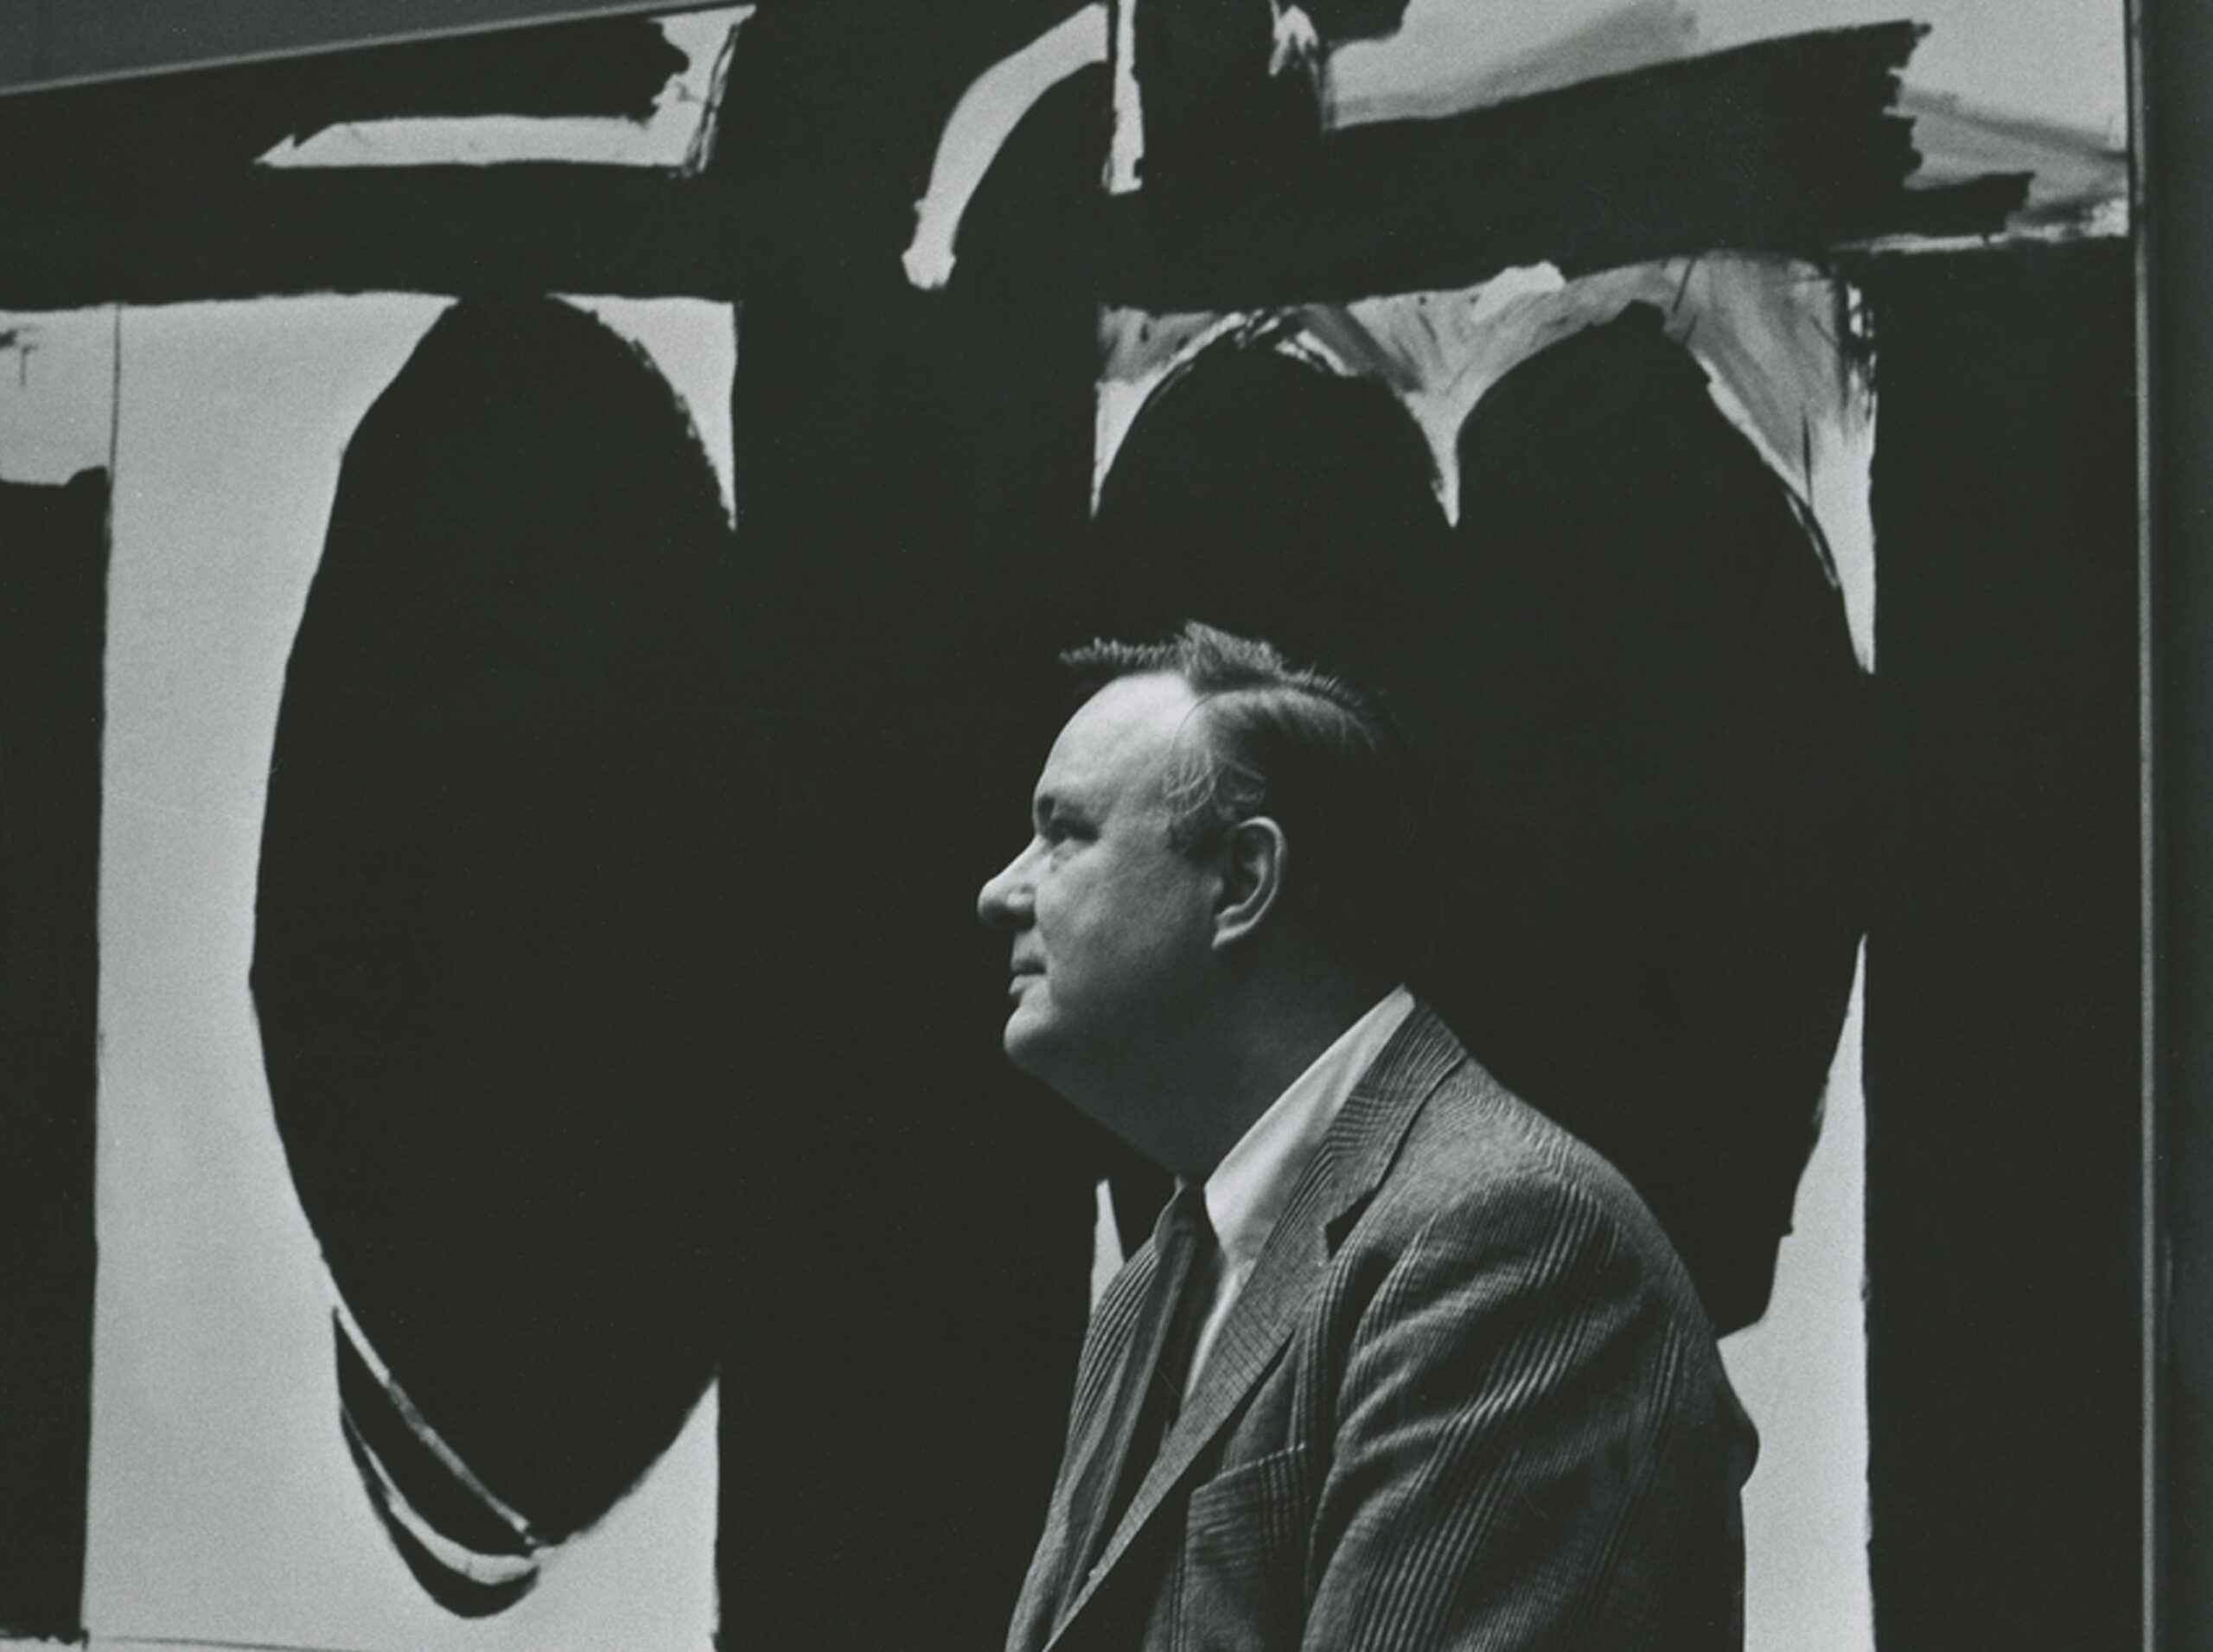 A side portrait of Robert Motherwell posing in front of an Elegy painting